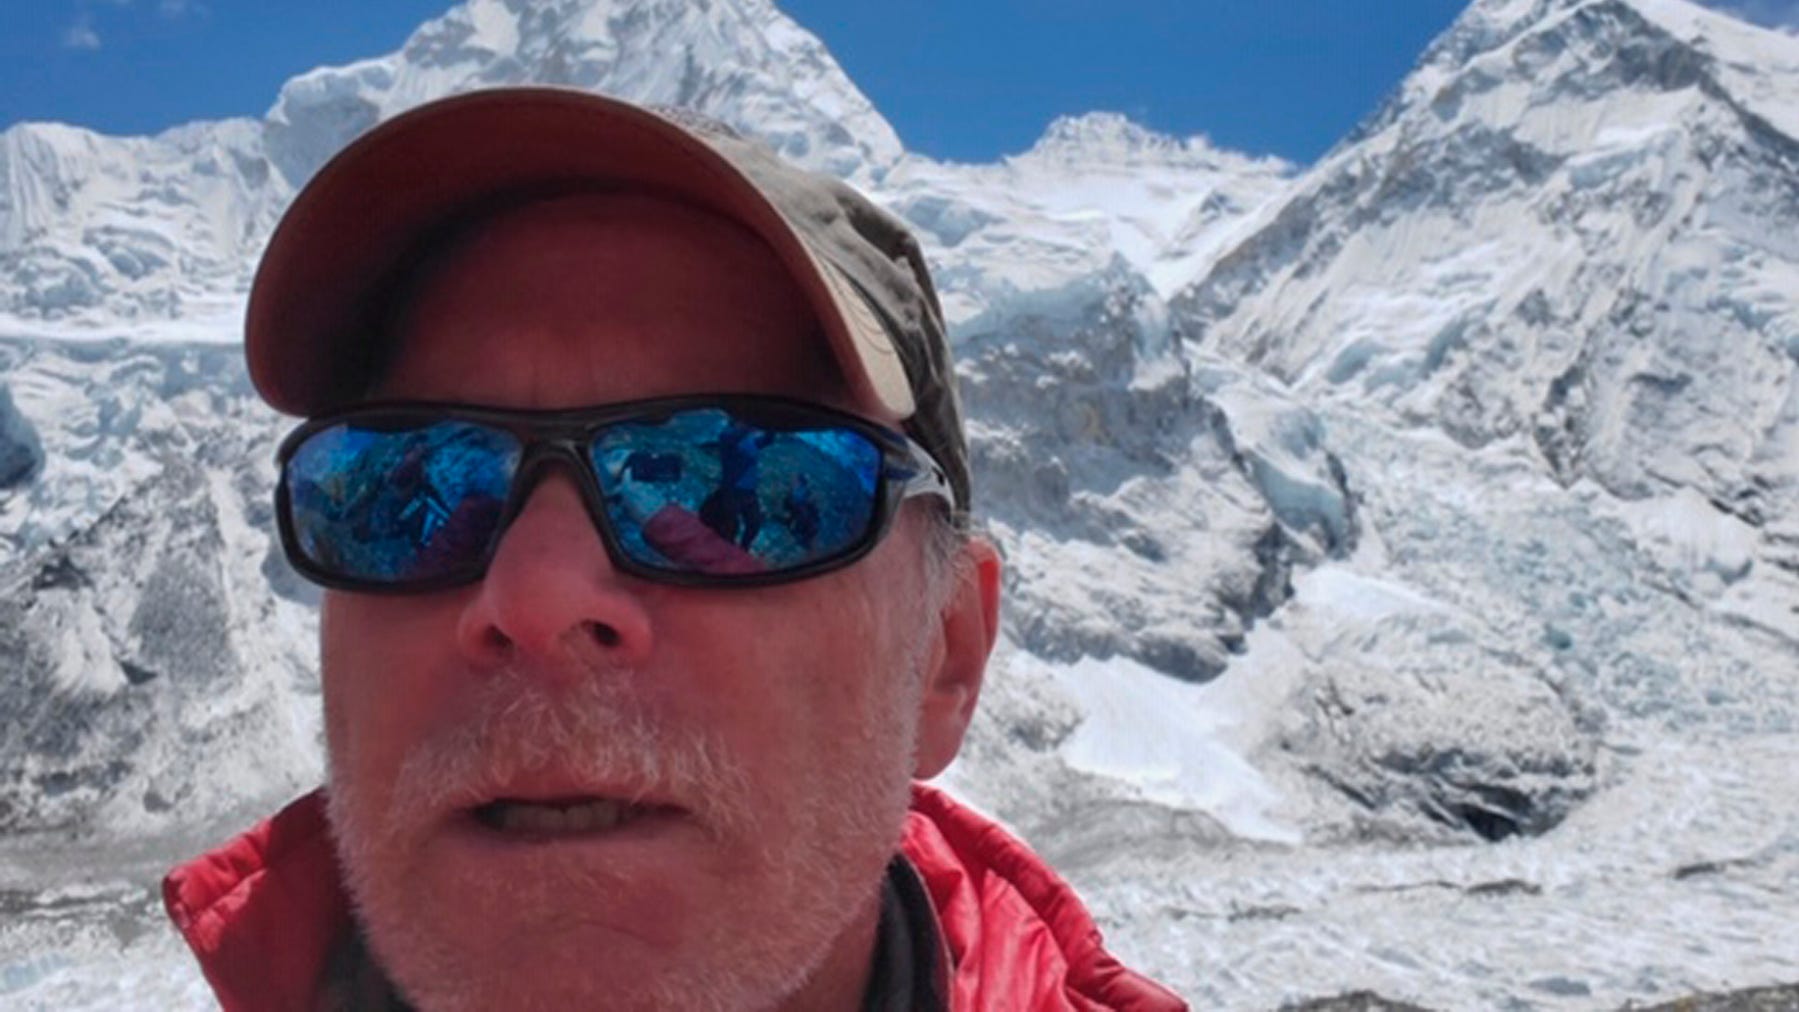 Mount Everest deaths Christopher Kulish dies amid overcrowding